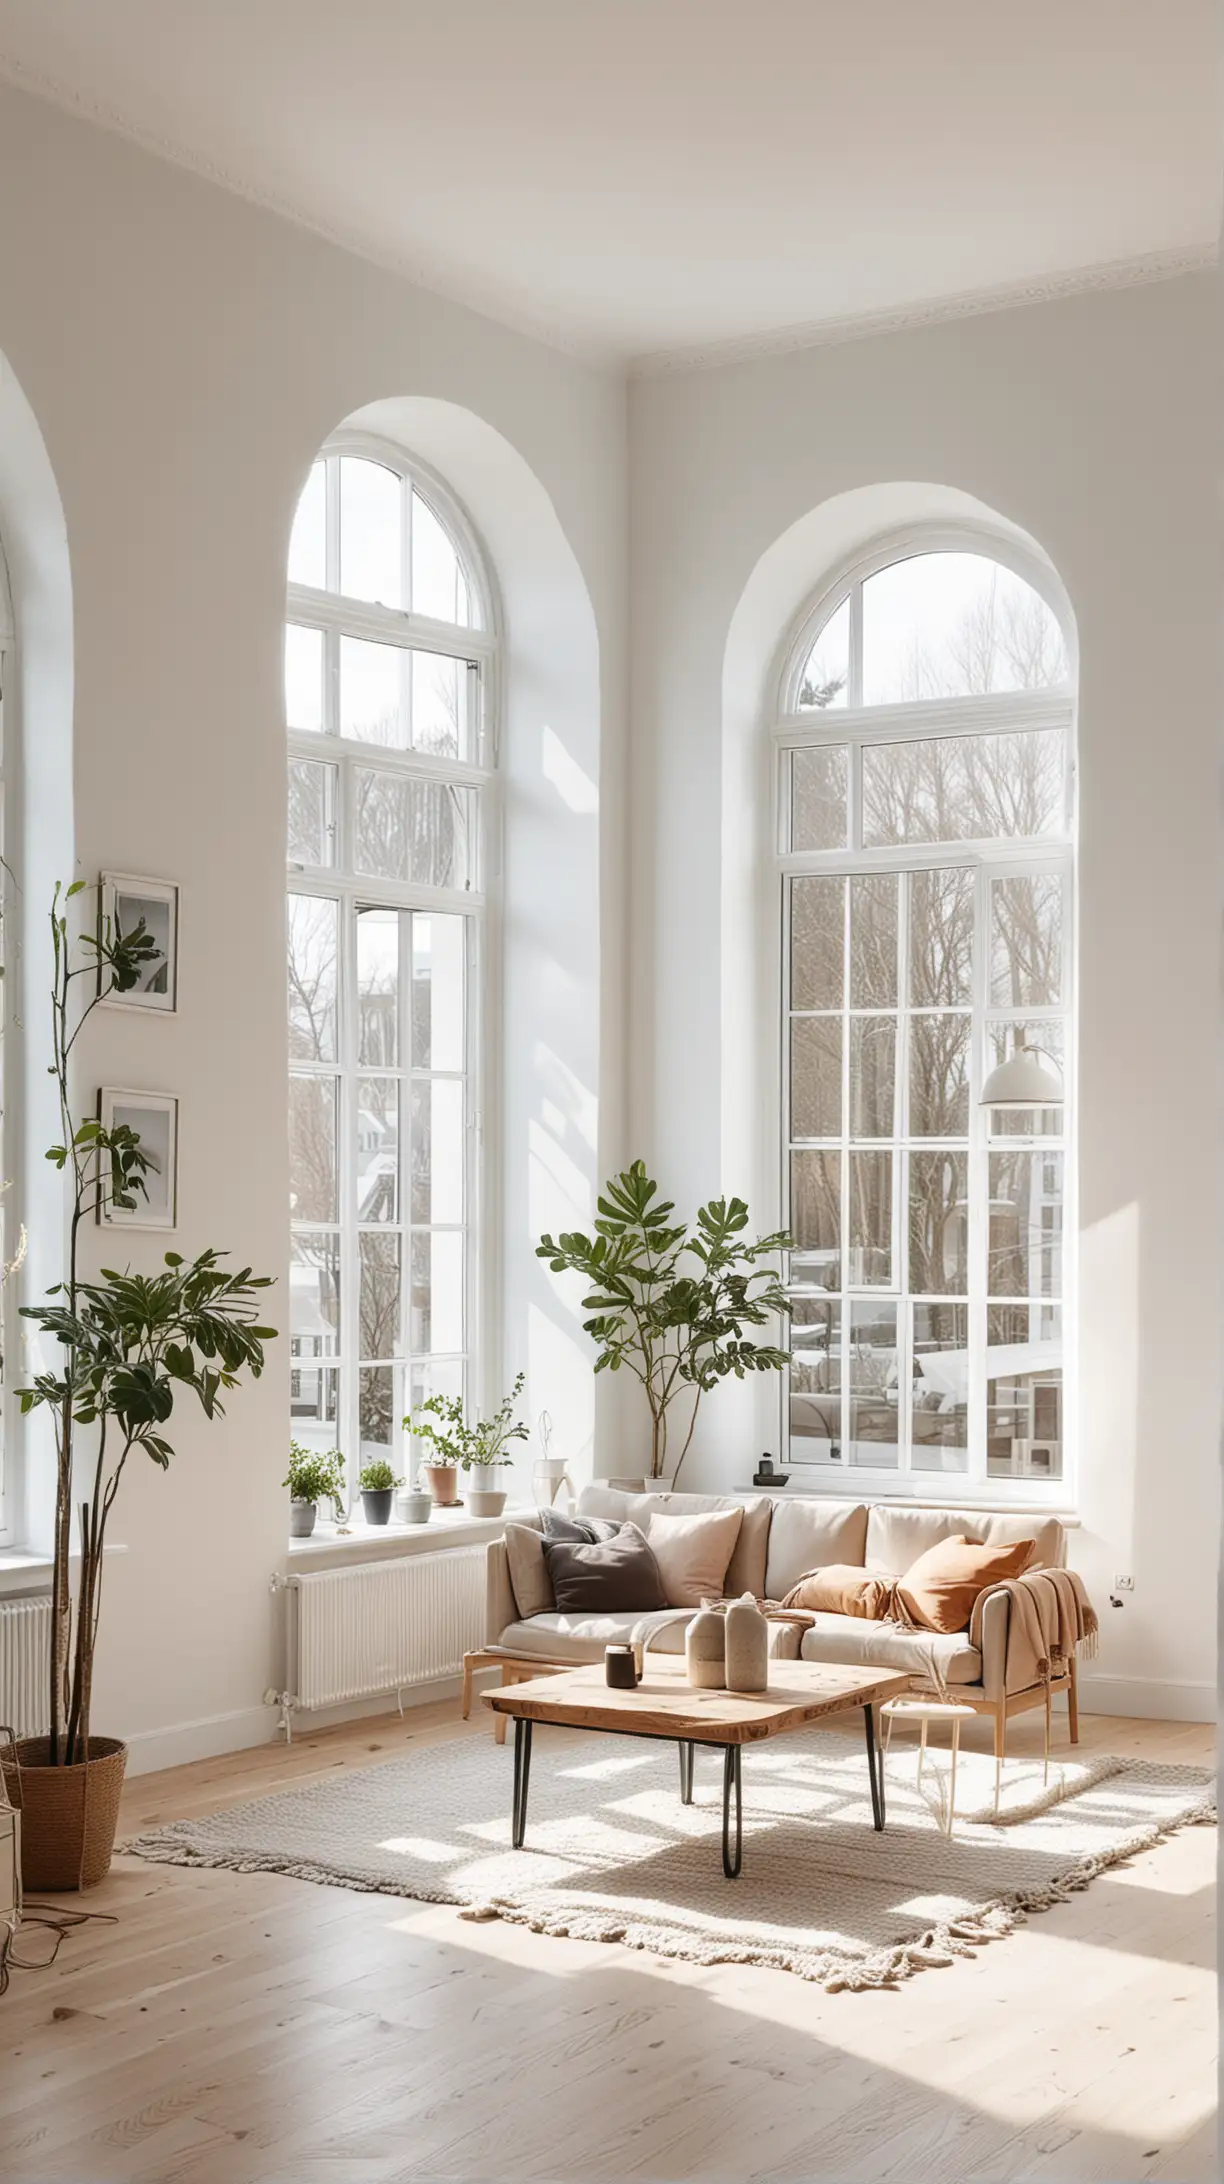 Bright Scandinavian living room with pristine white walls, natural light flooding in through large windows, minimal decor, and a cozy feel.